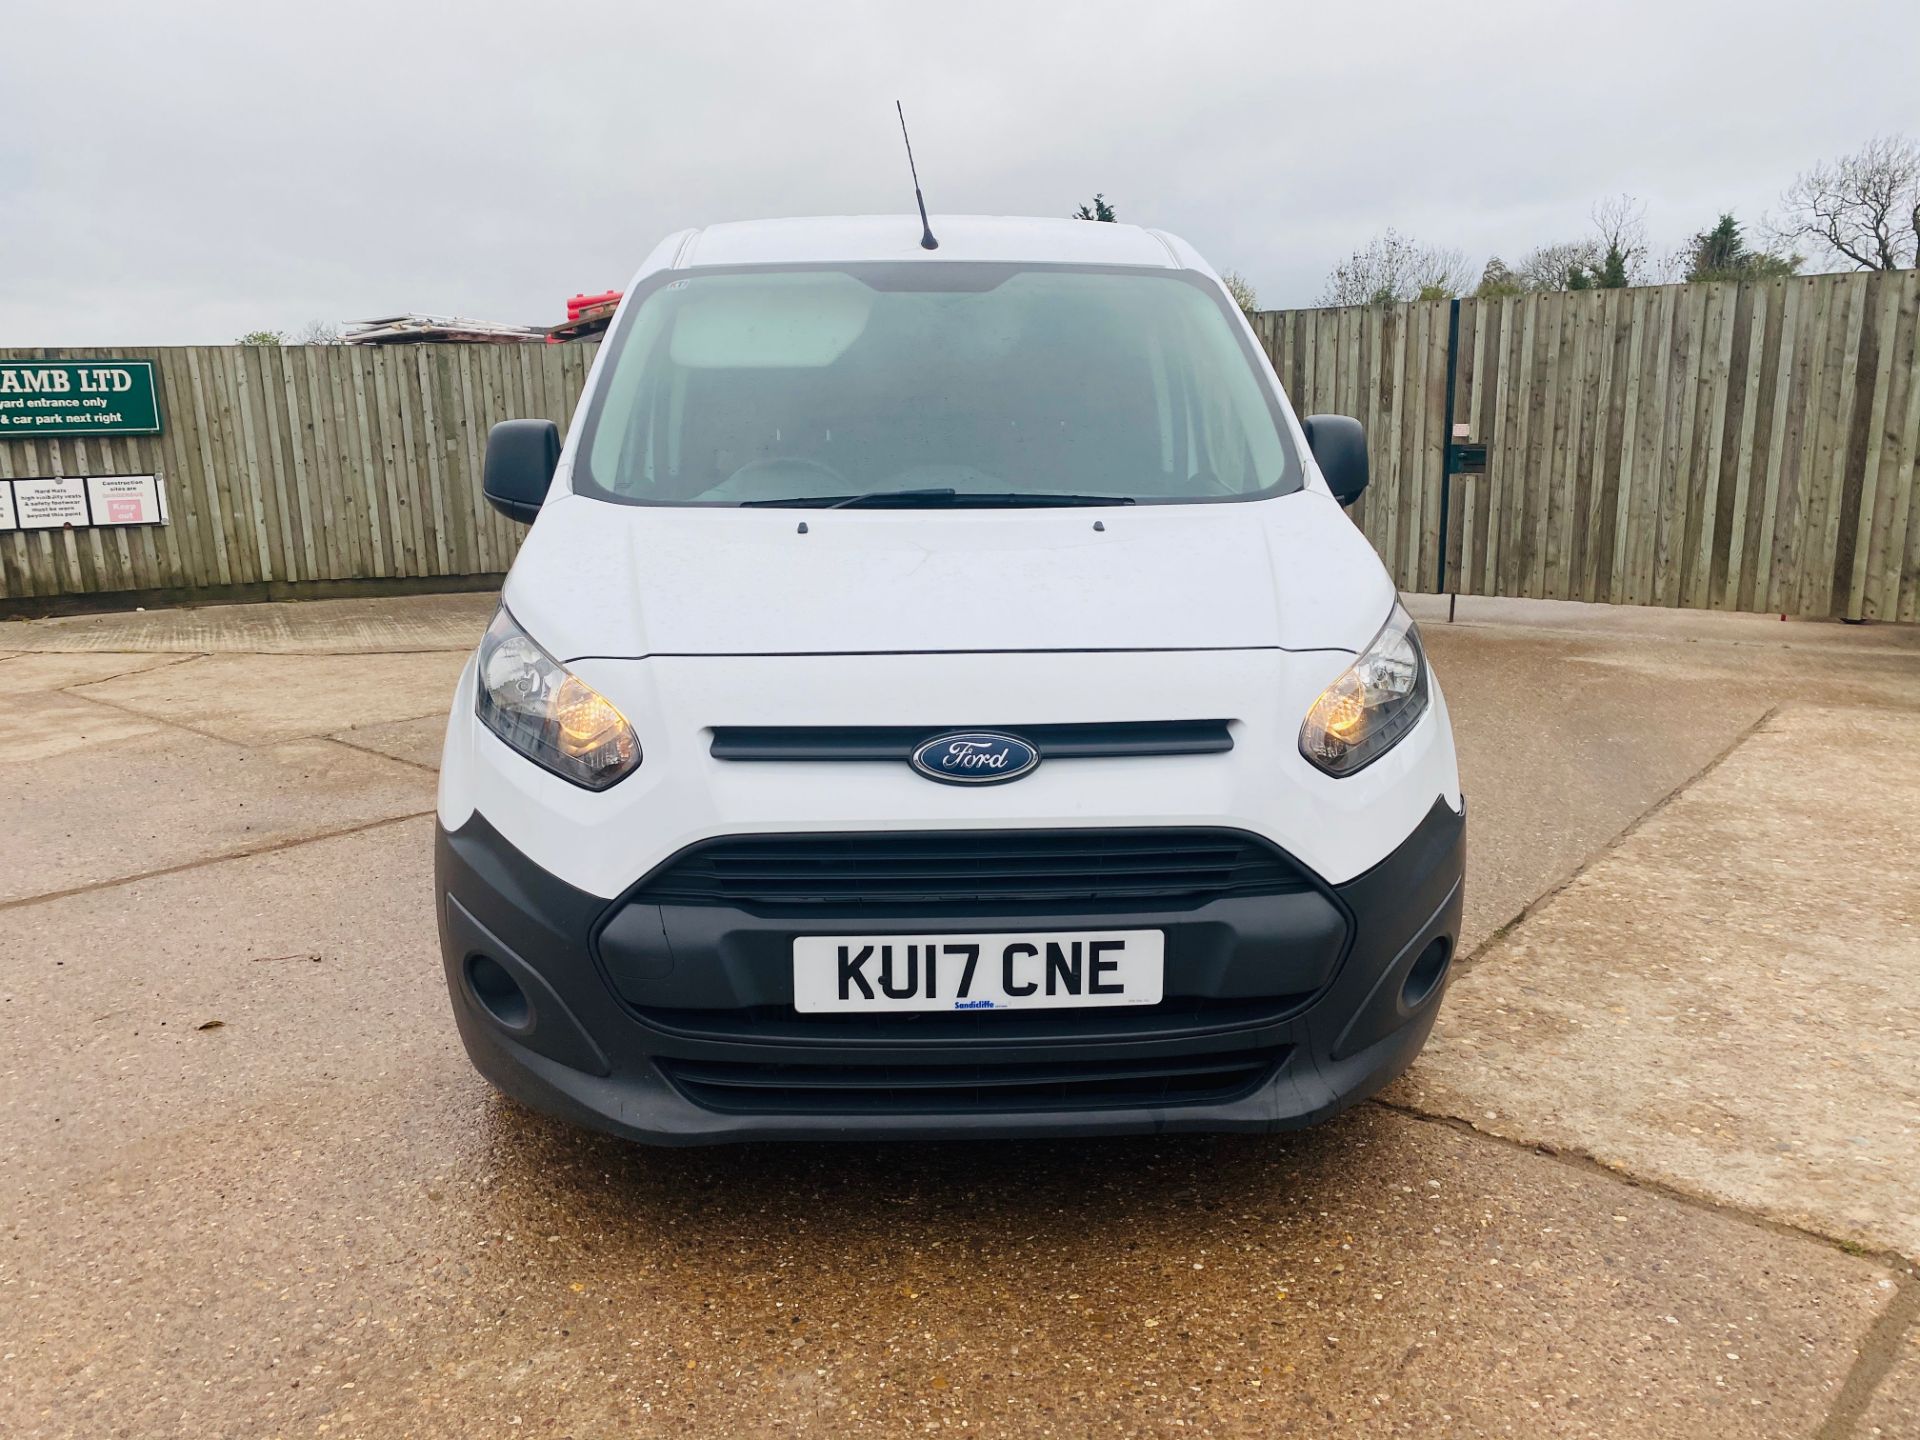 On Sale FORD TRANSIT CONNECT 1.5TDCI (EURO6) 17 REG - 1 OWNER - AIR CON - GREAT SPEC - FSH - LOOK!!! - Image 3 of 18